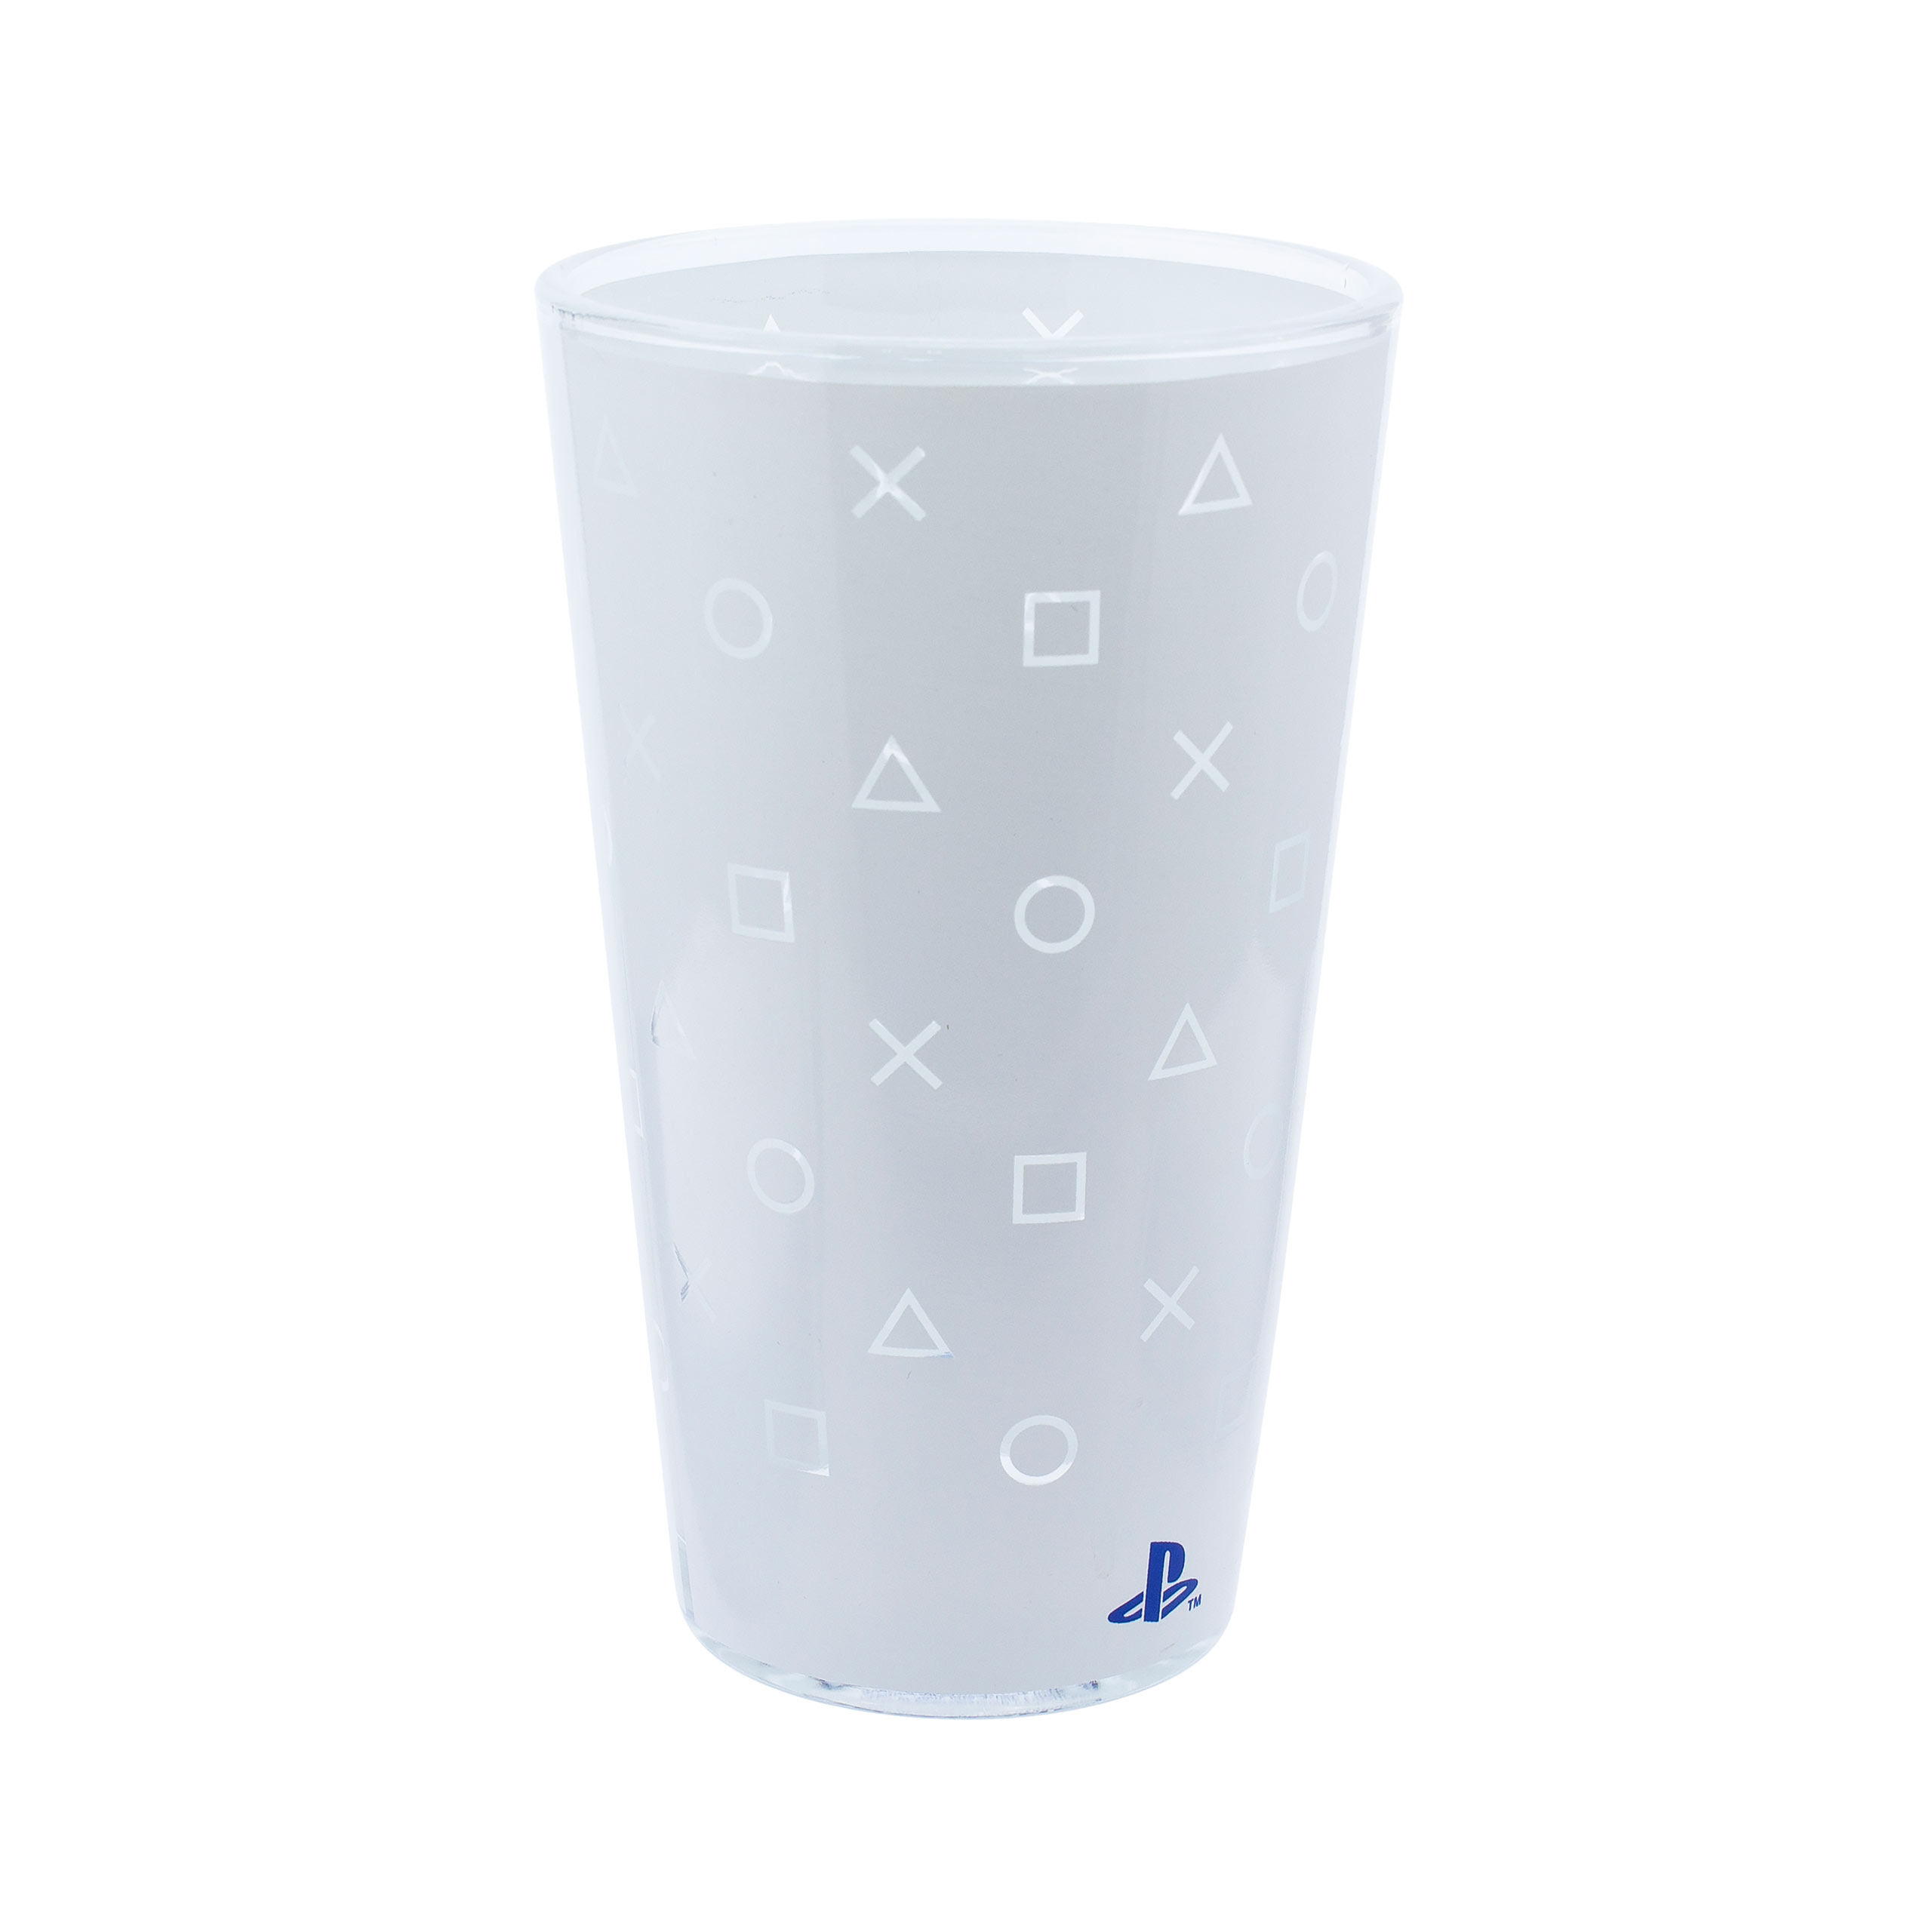 PlayStation - PS5 Knoppen Glas